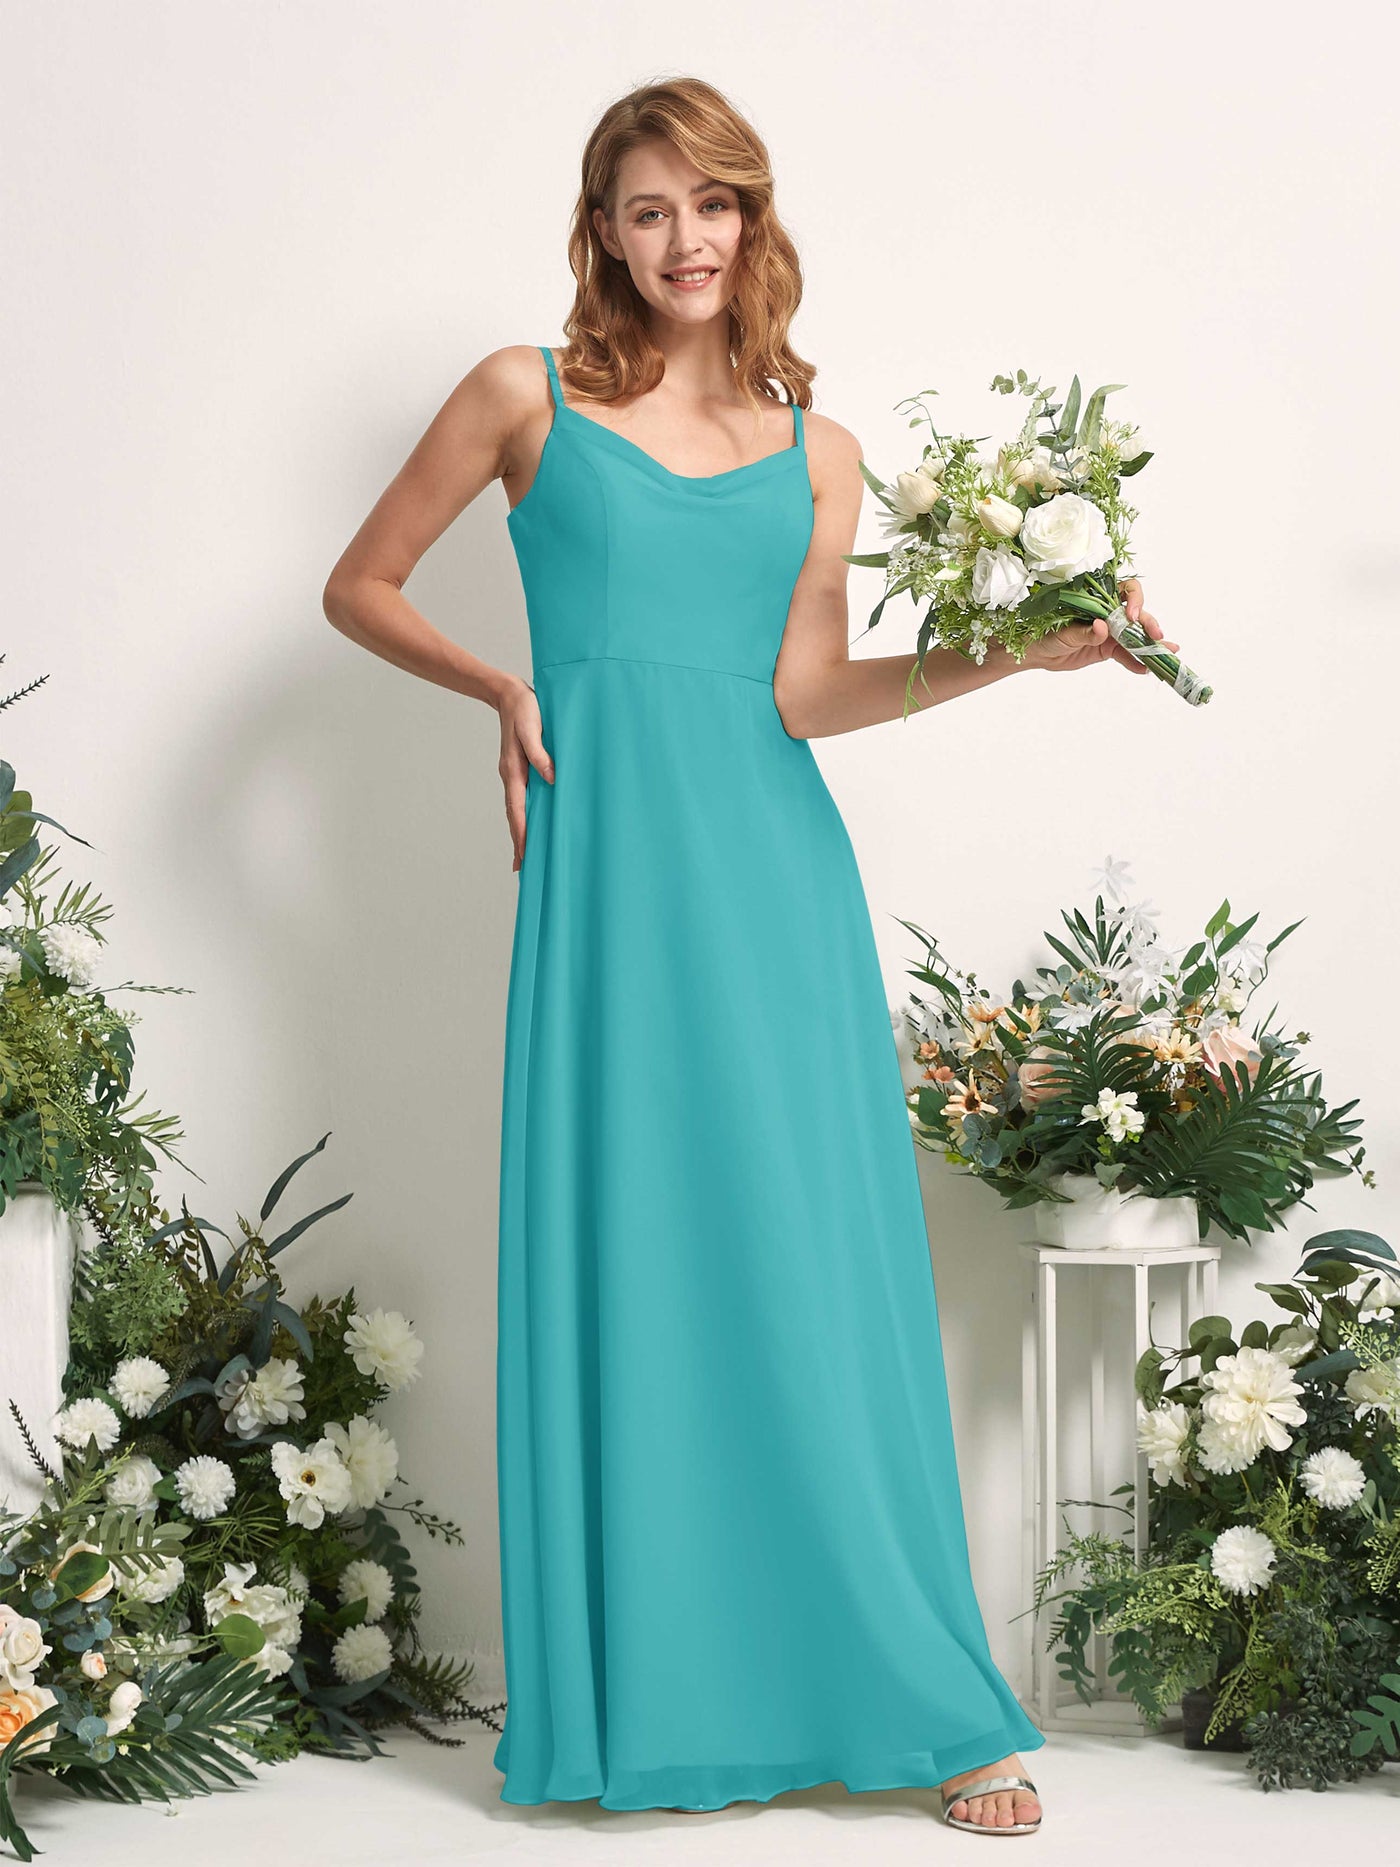 Bridesmaid Dress A-line Chiffon Spaghetti-straps Full Length Sleeveless Wedding Party Dress - Turquoise (81227223)#color_turquoise